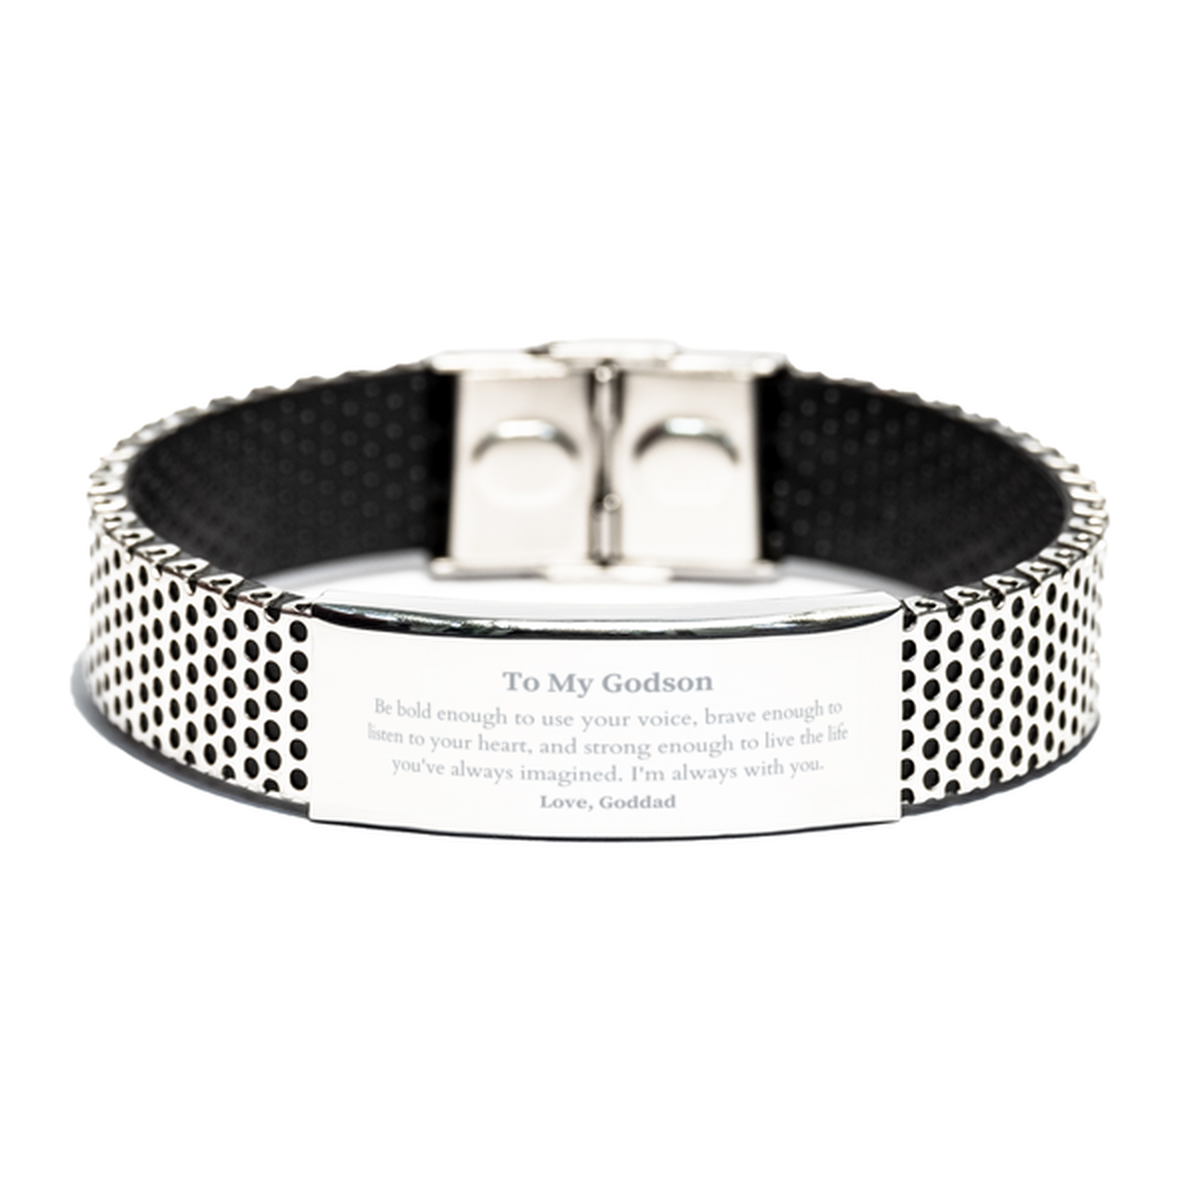 Keepsake Godson Stainless Steel Bracelet Gift Idea Graduation Christmas Birthday Godson from Goddad, Godson Be bold enough to use your voice, brave enough to listen to your heart. Love, Goddad